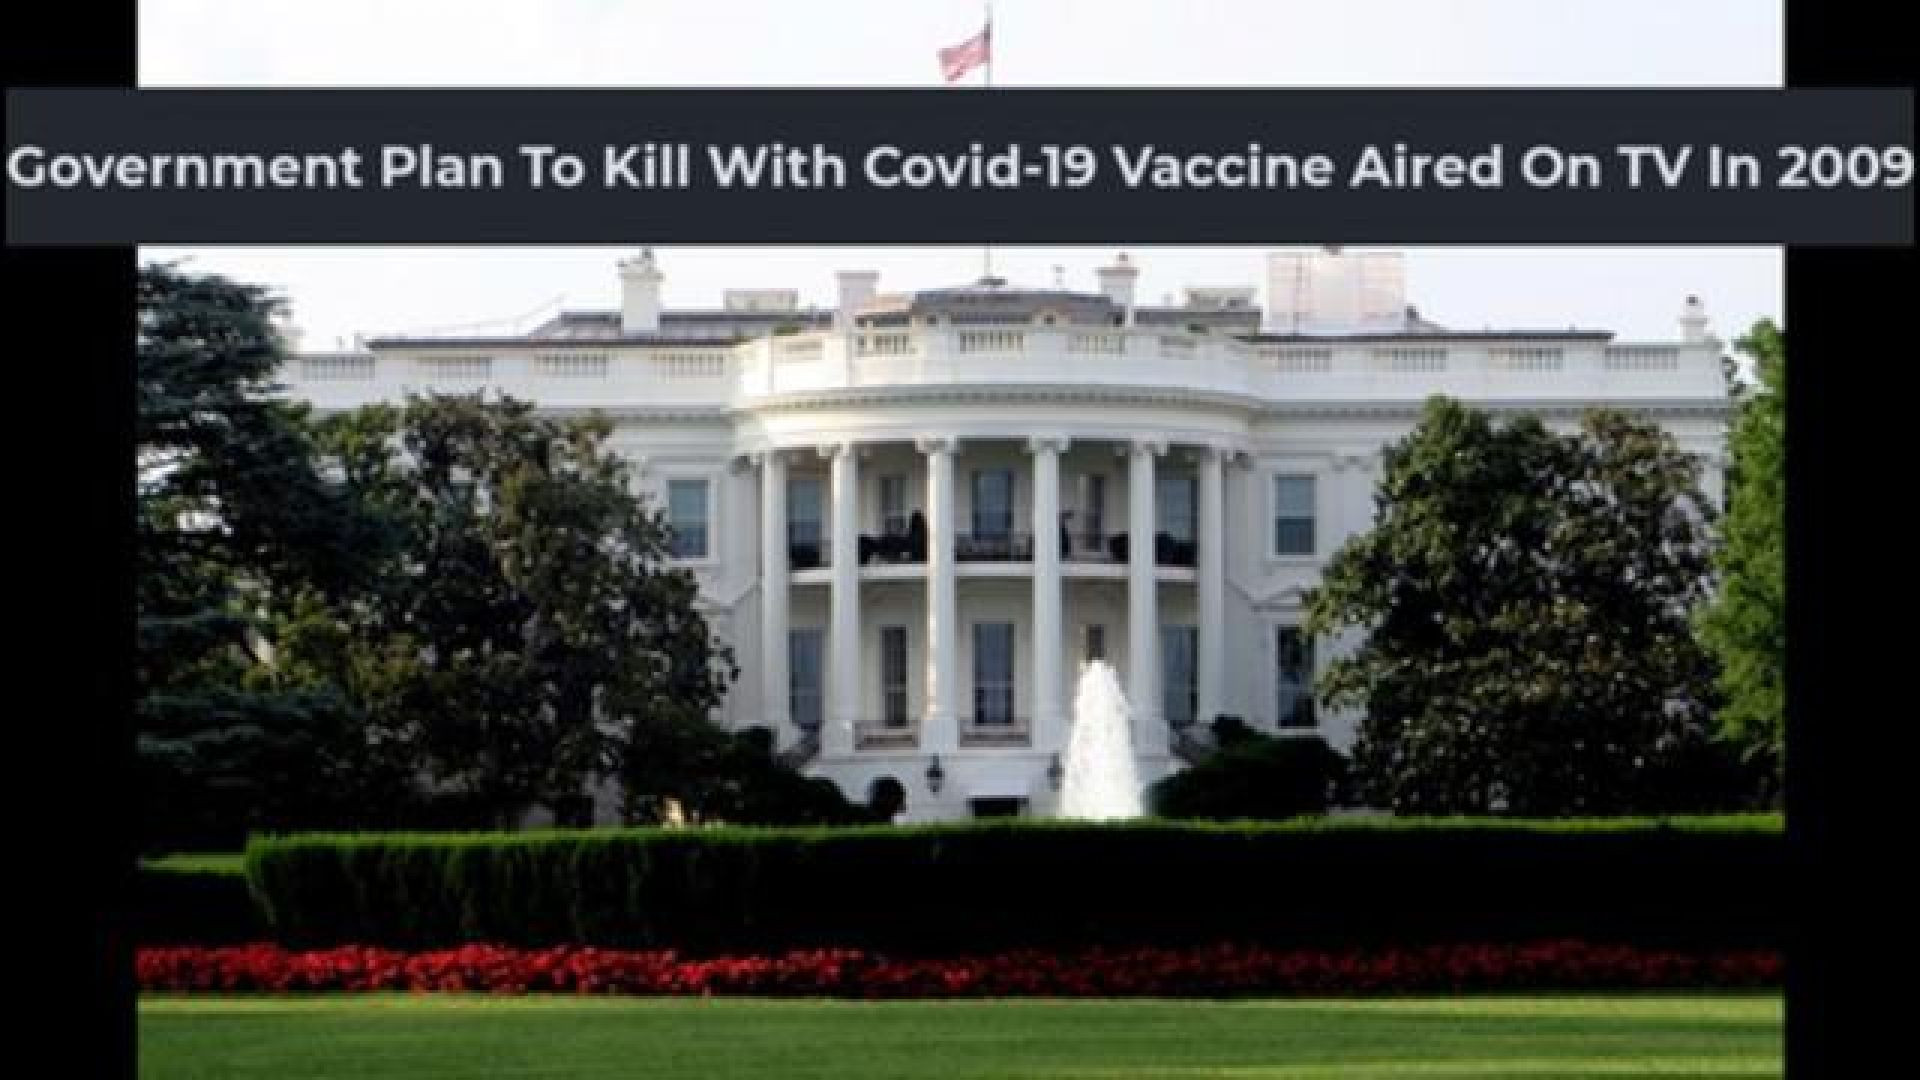 ⁣THE GOVERNMENTS PLAN TO KILL WITH THE COVID-19 VACCINE AIRED ON TV IN 2009